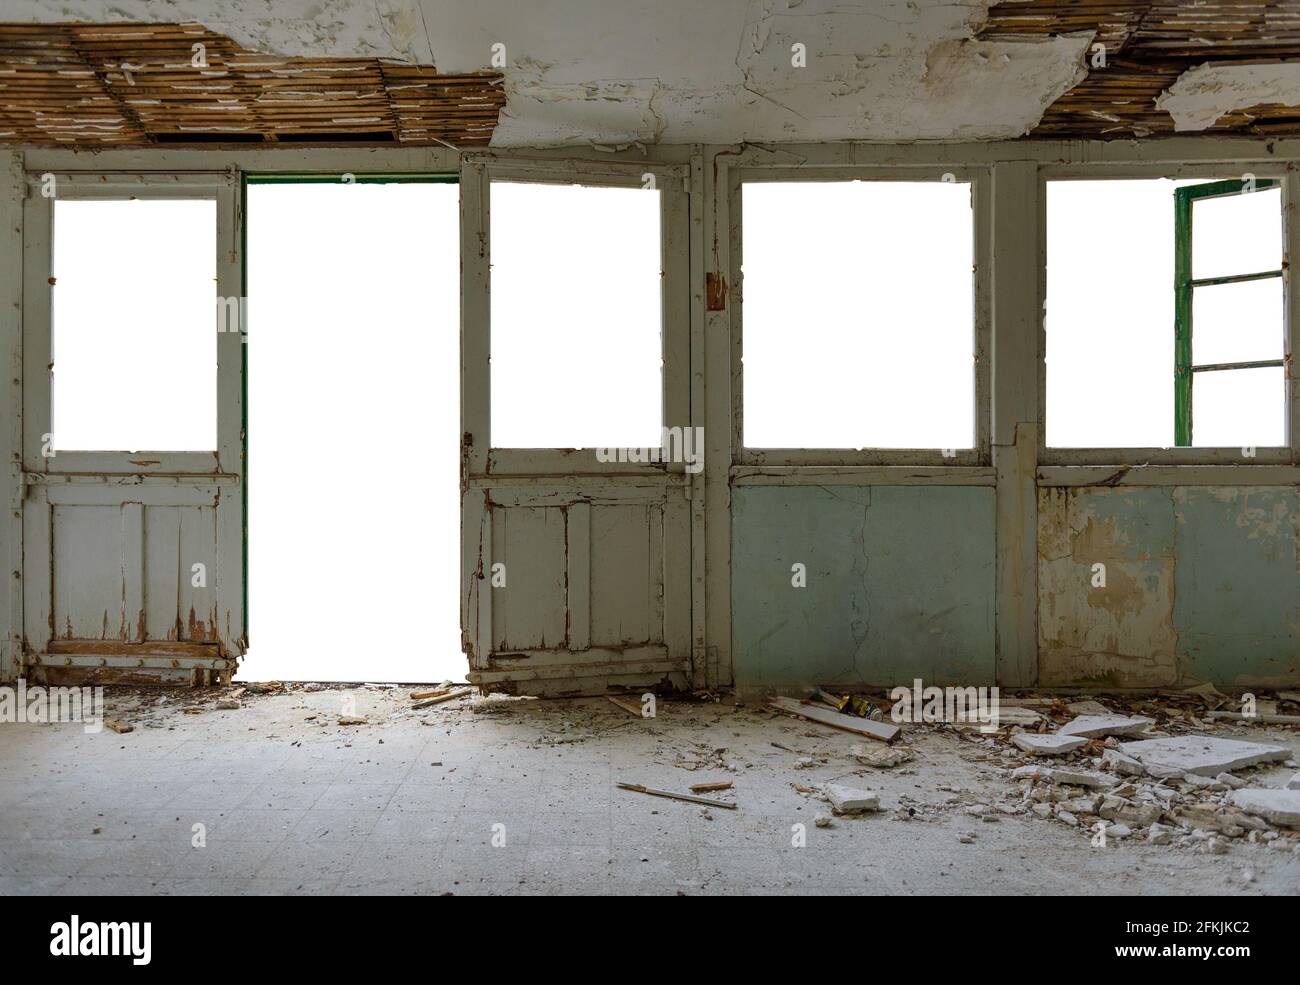 Isolated abandoned house interior. Gallery with door and window frames, broken glass and fallen plaster, cut out view outside Stock Photo